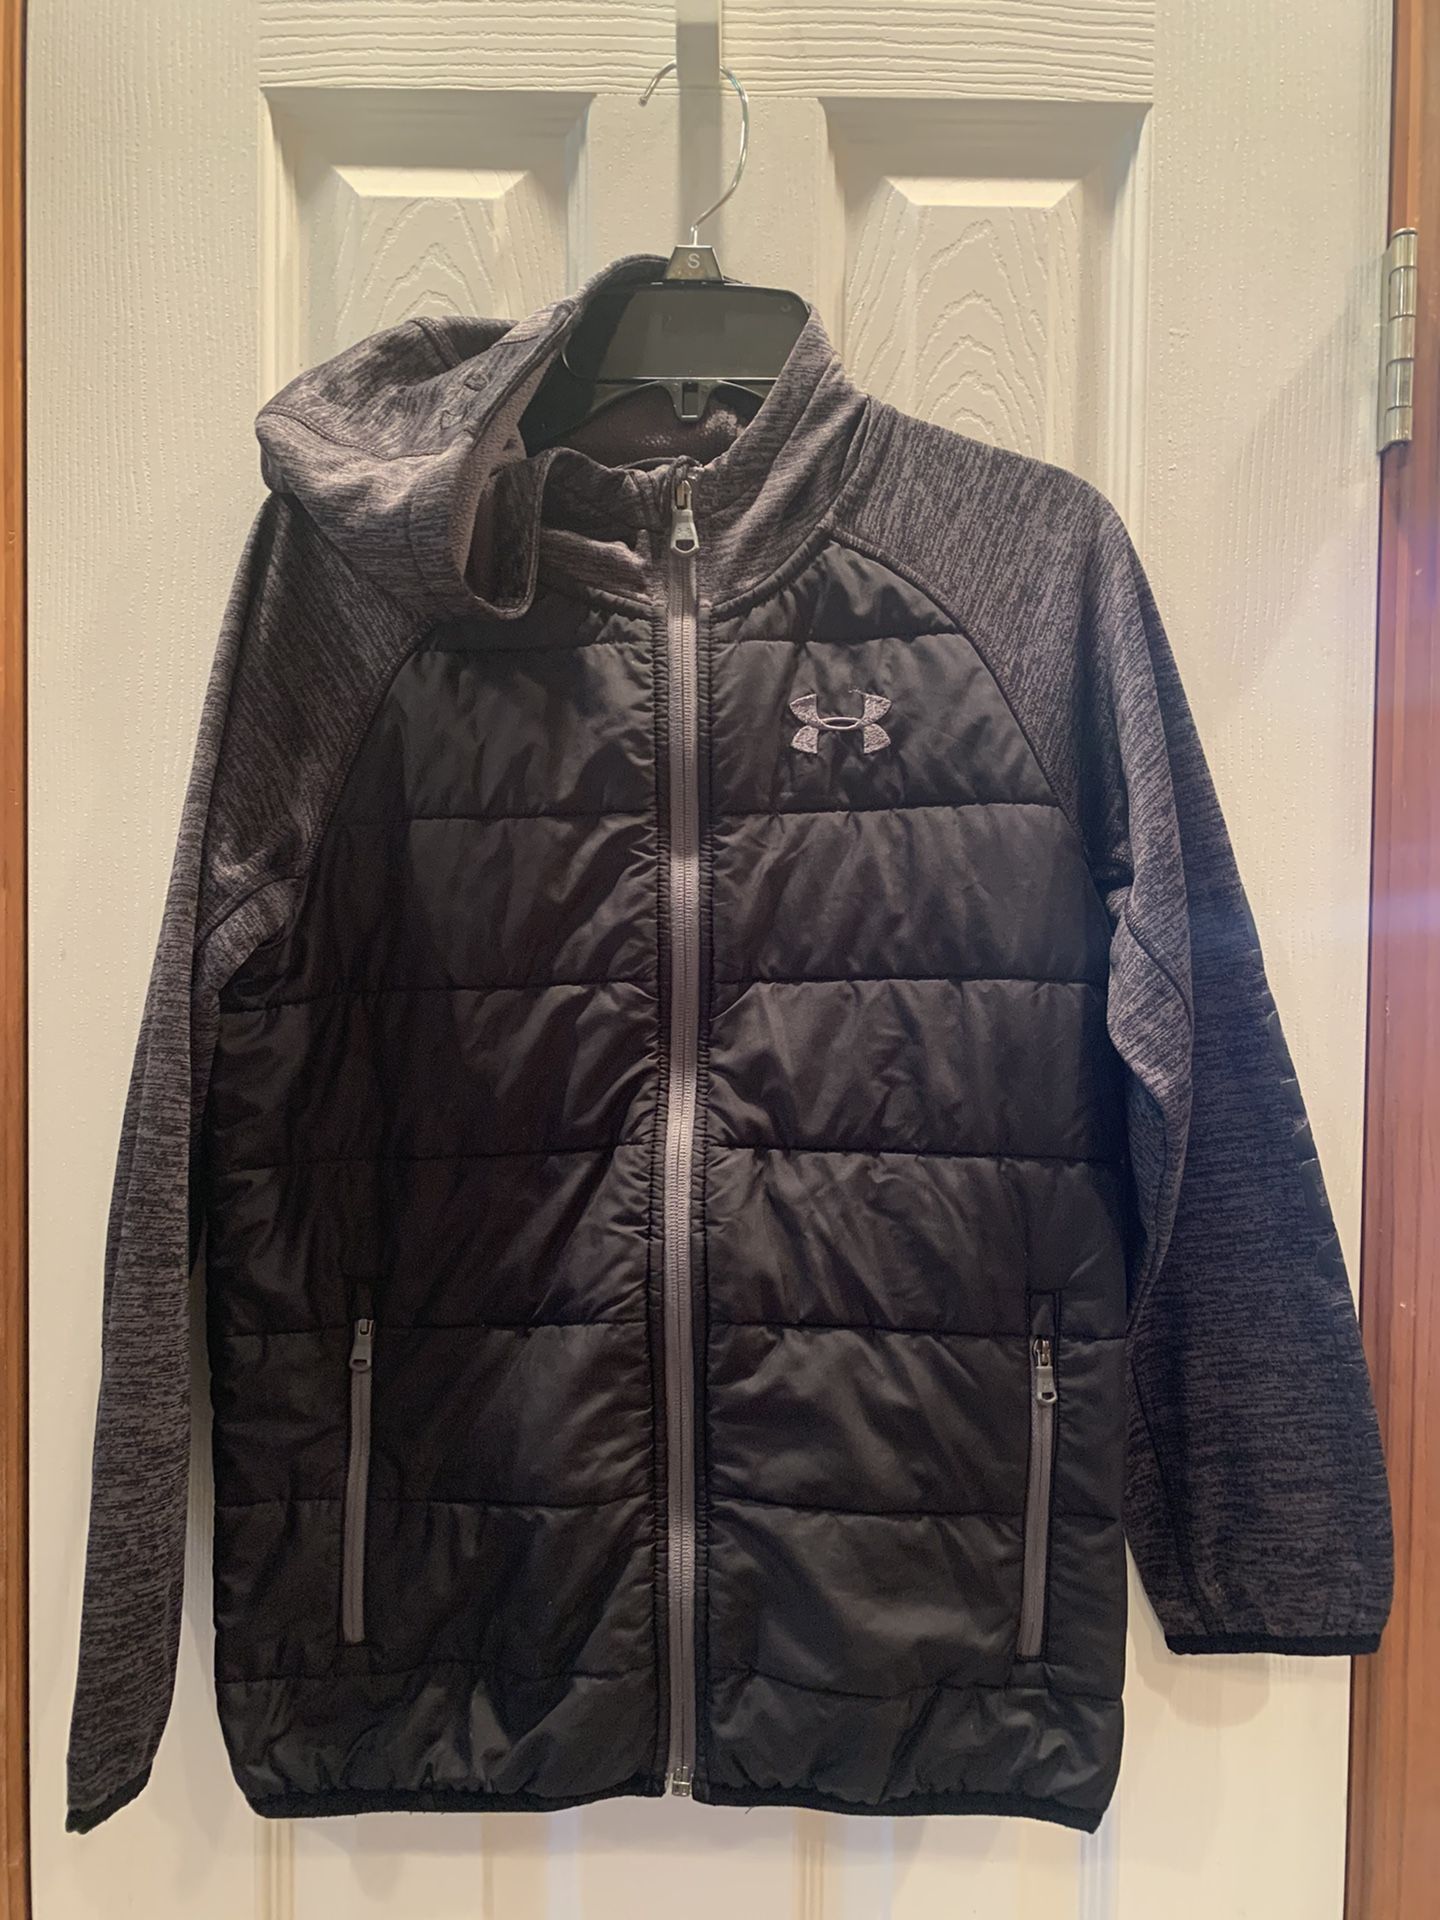 ❄️Under Armour Cold Gear Boys Youth Size Medium Kids Hooded Coat Jacket with zippered pockets 